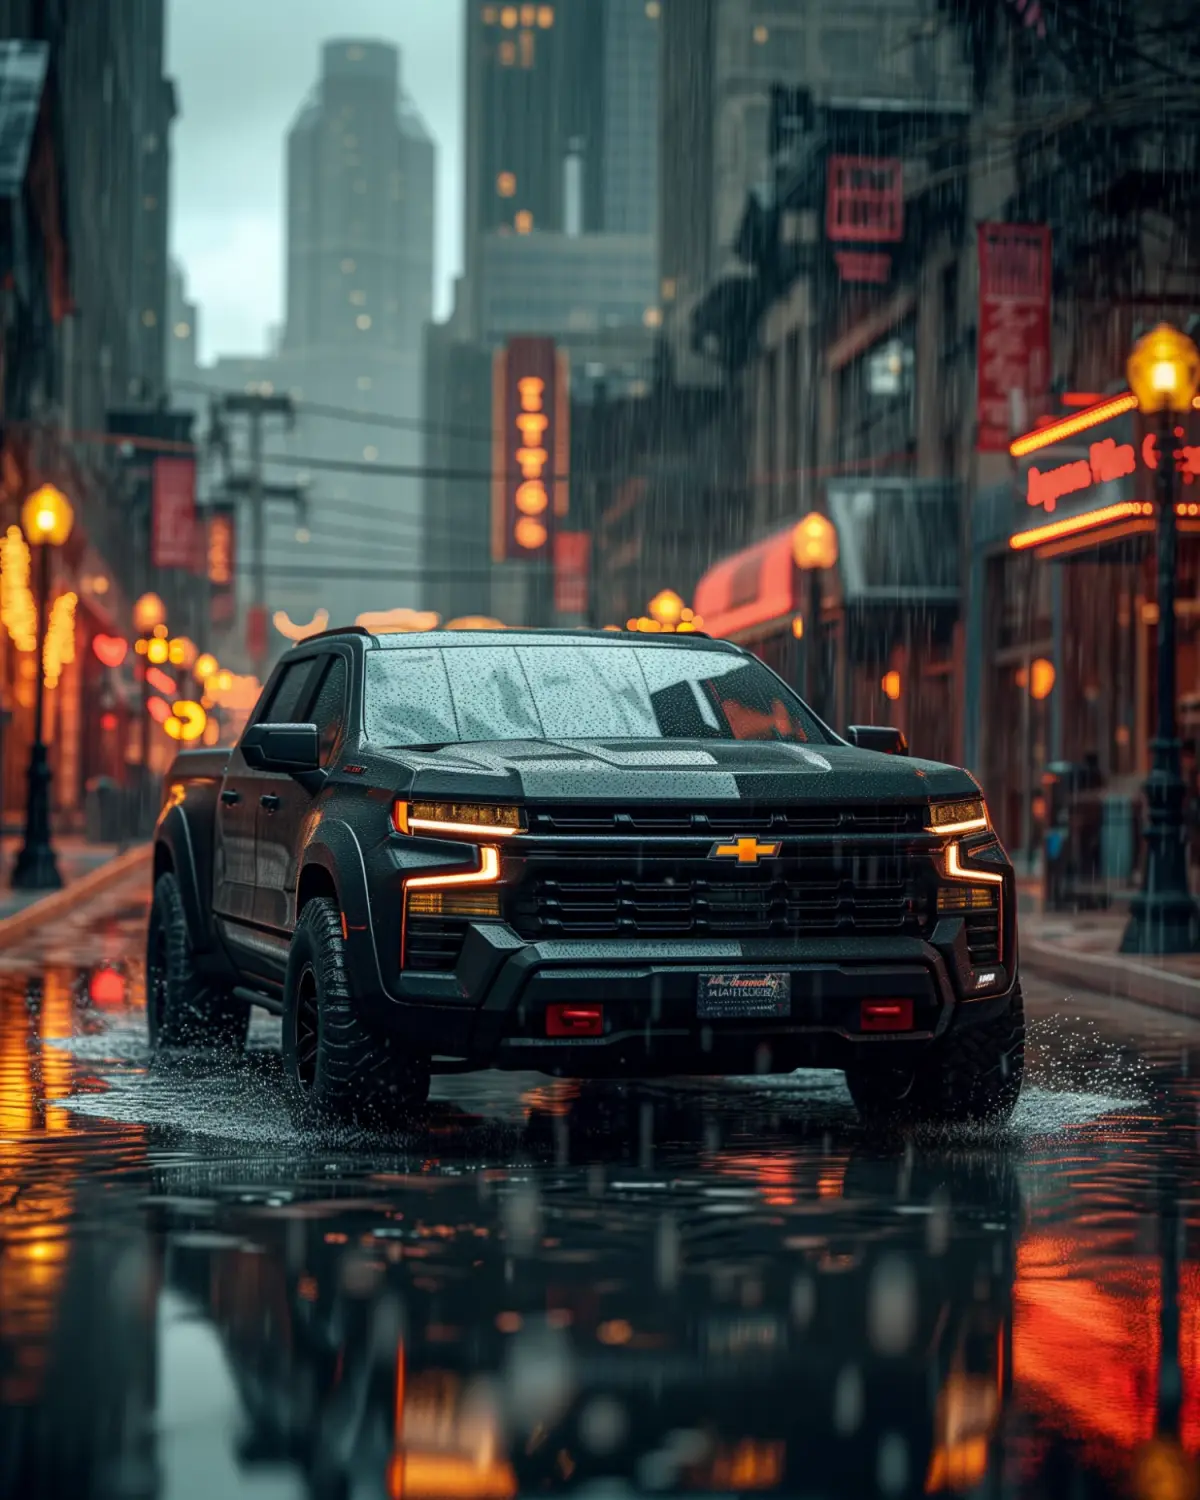 Chevrolet Avalanche with versatile customizations in an urban setting